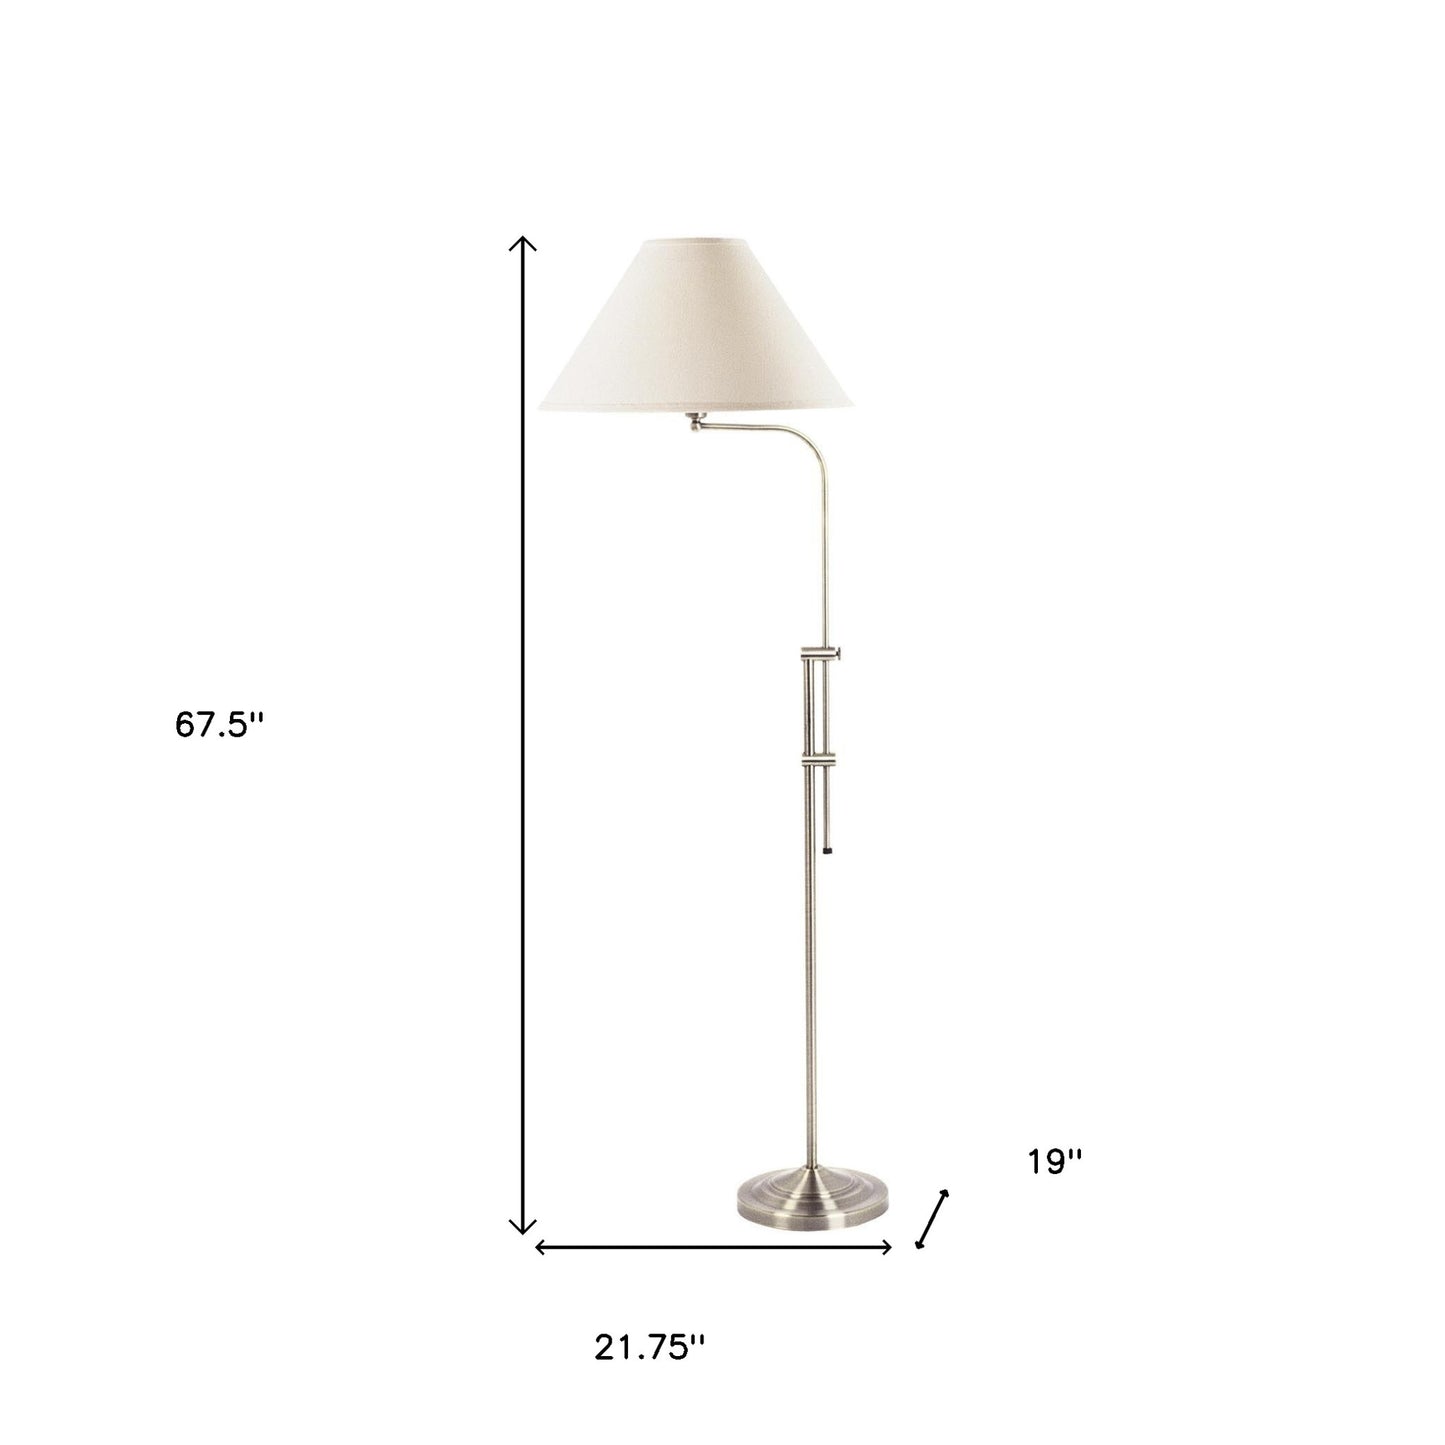 68" Nickel Adjustable Traditional Shaped Floor Lamp With White Empire Shade